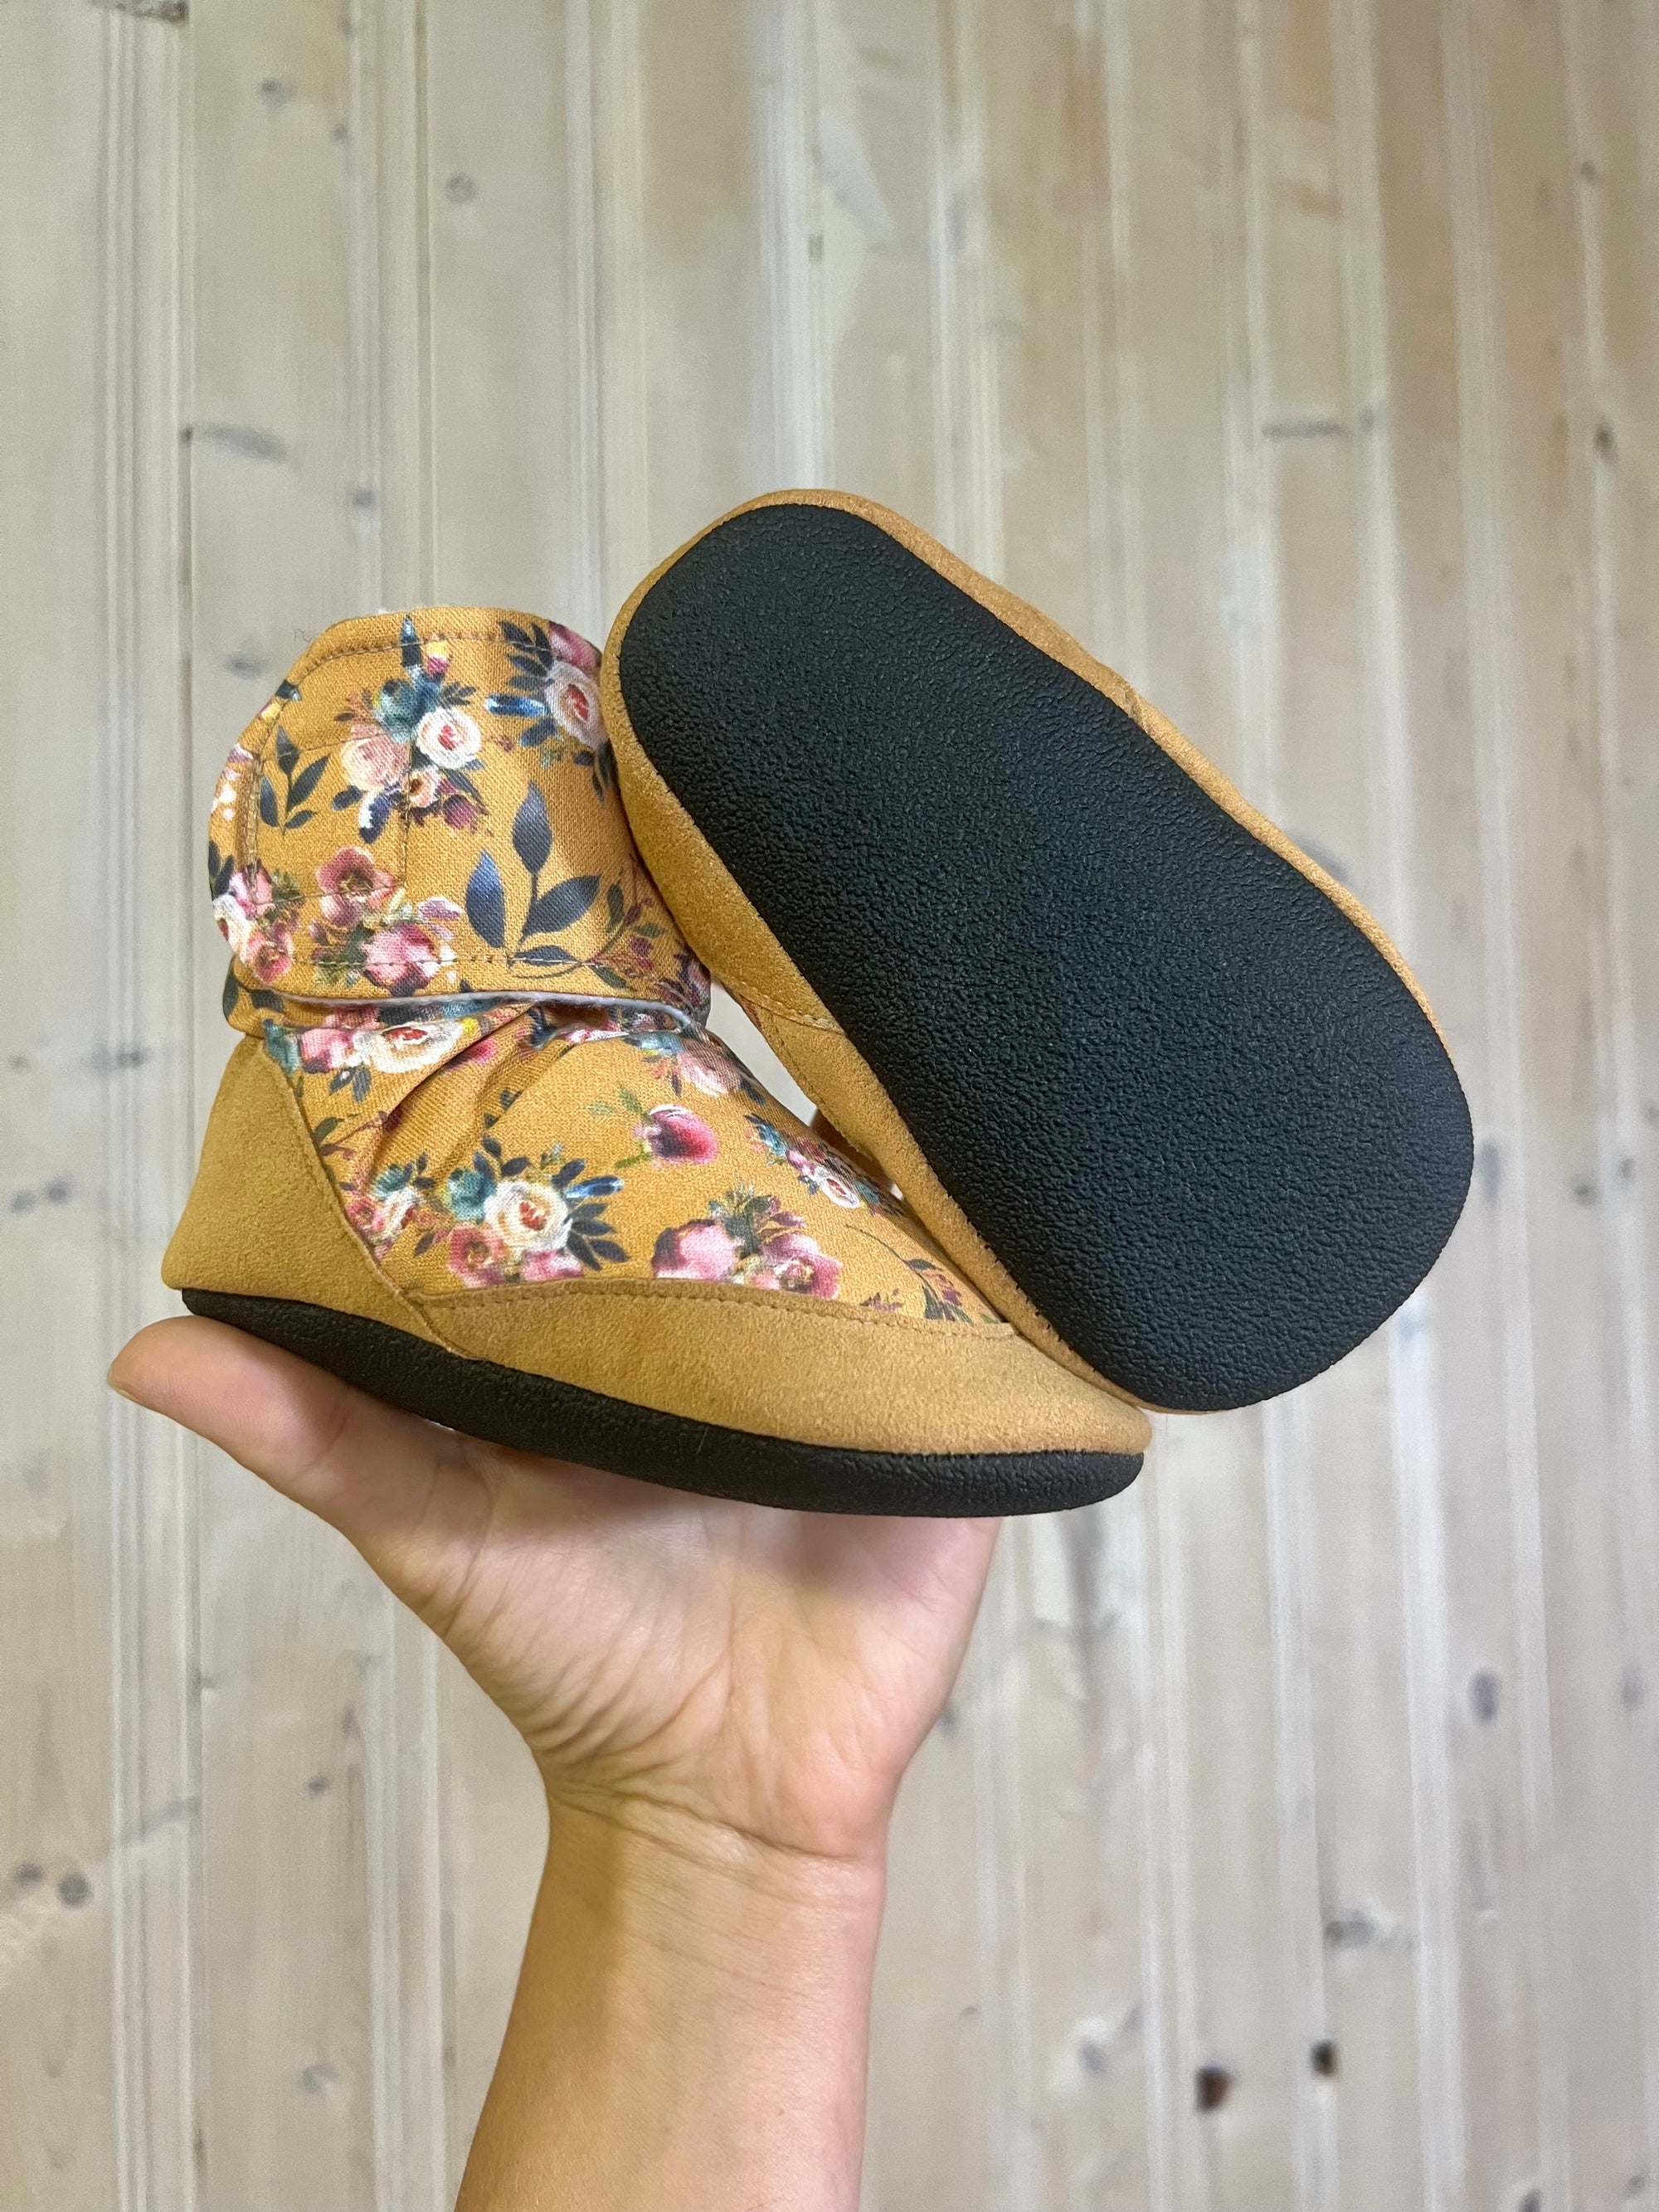 Original boots - Mustard floral - Ready to ship